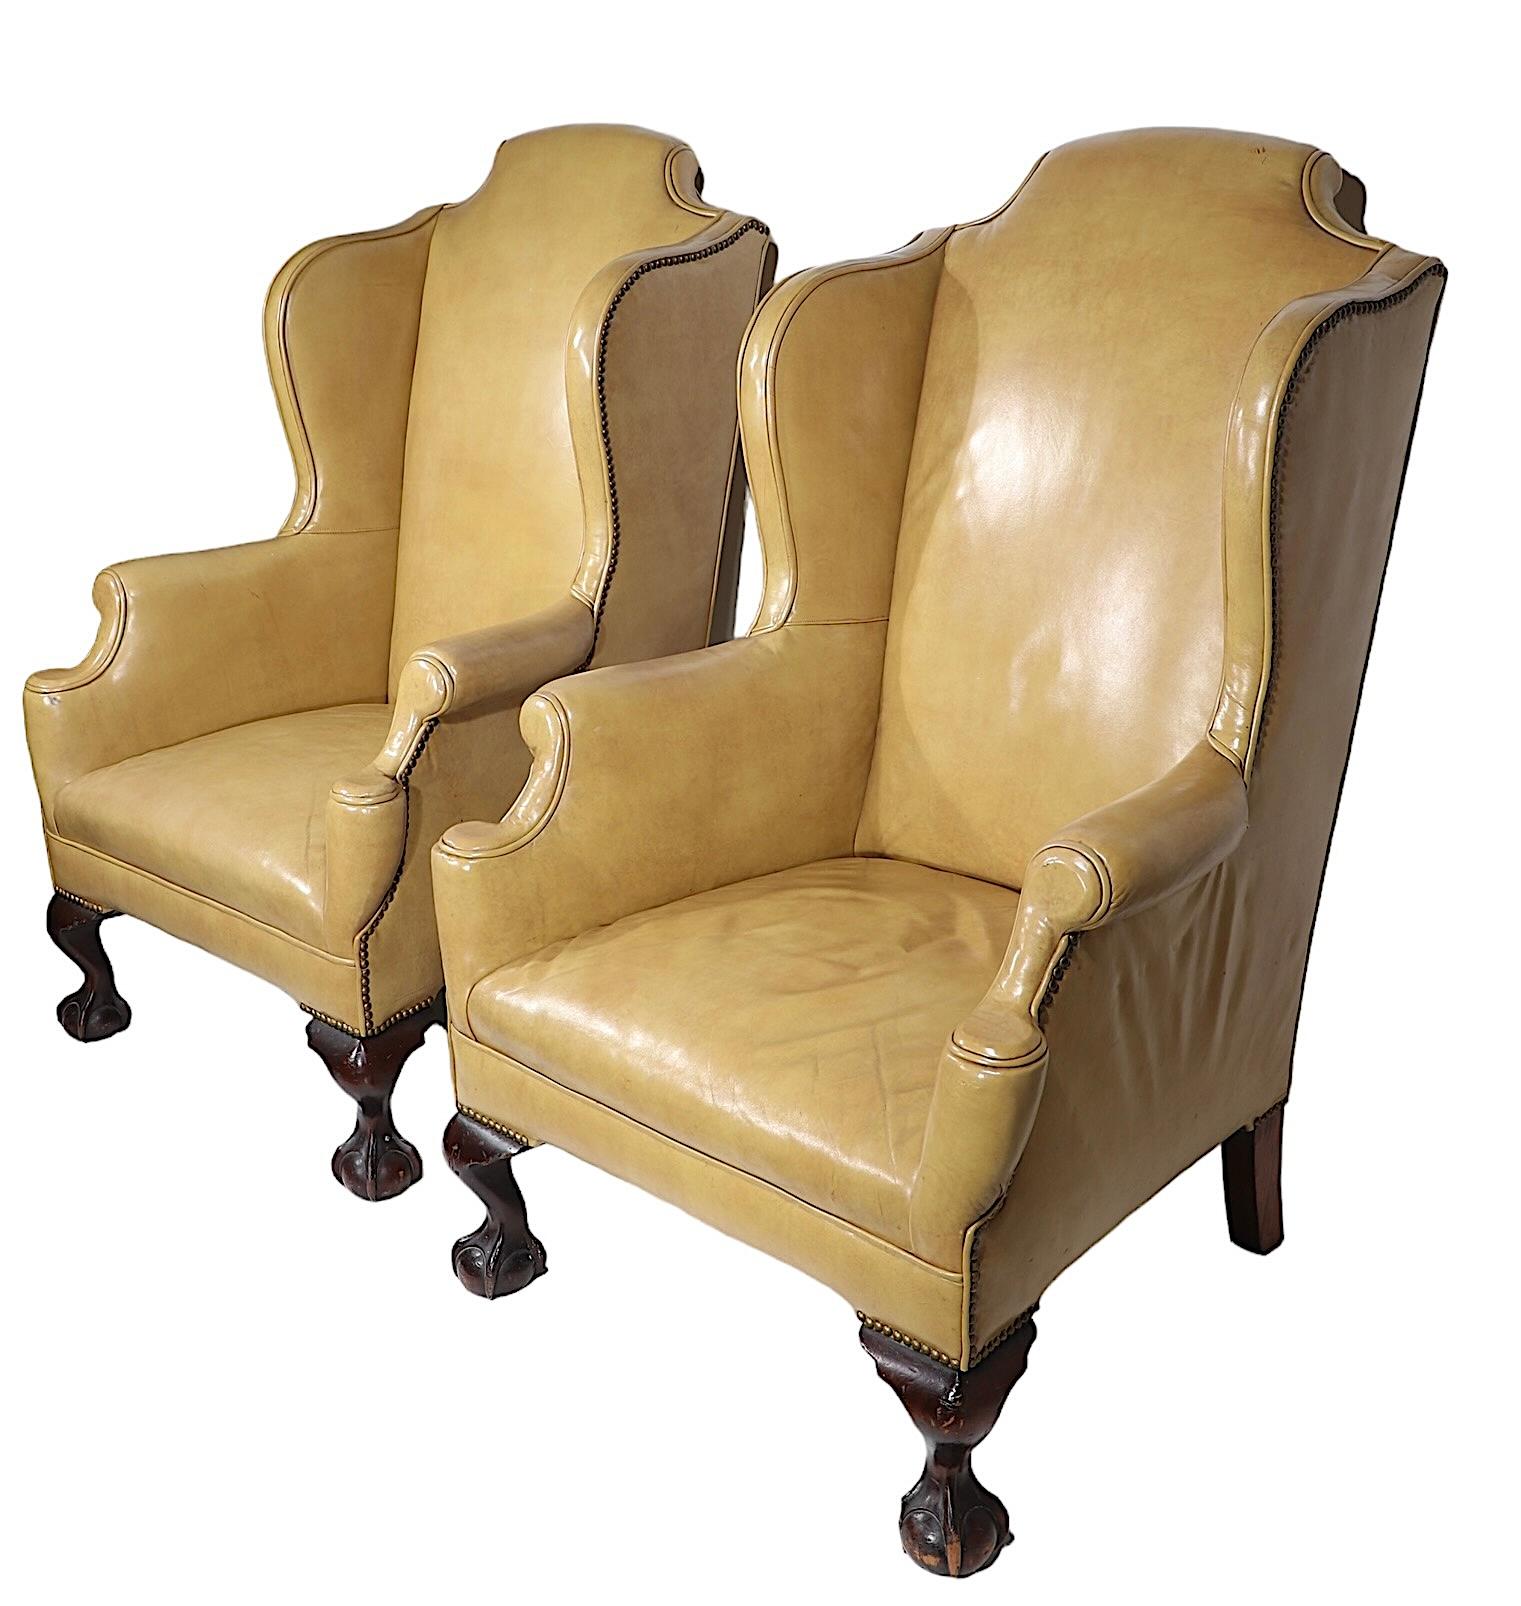 20th Century Pr. Leather Wingback Chairs with Ball and Claw Feet and  Nailhead Studs  For Sale